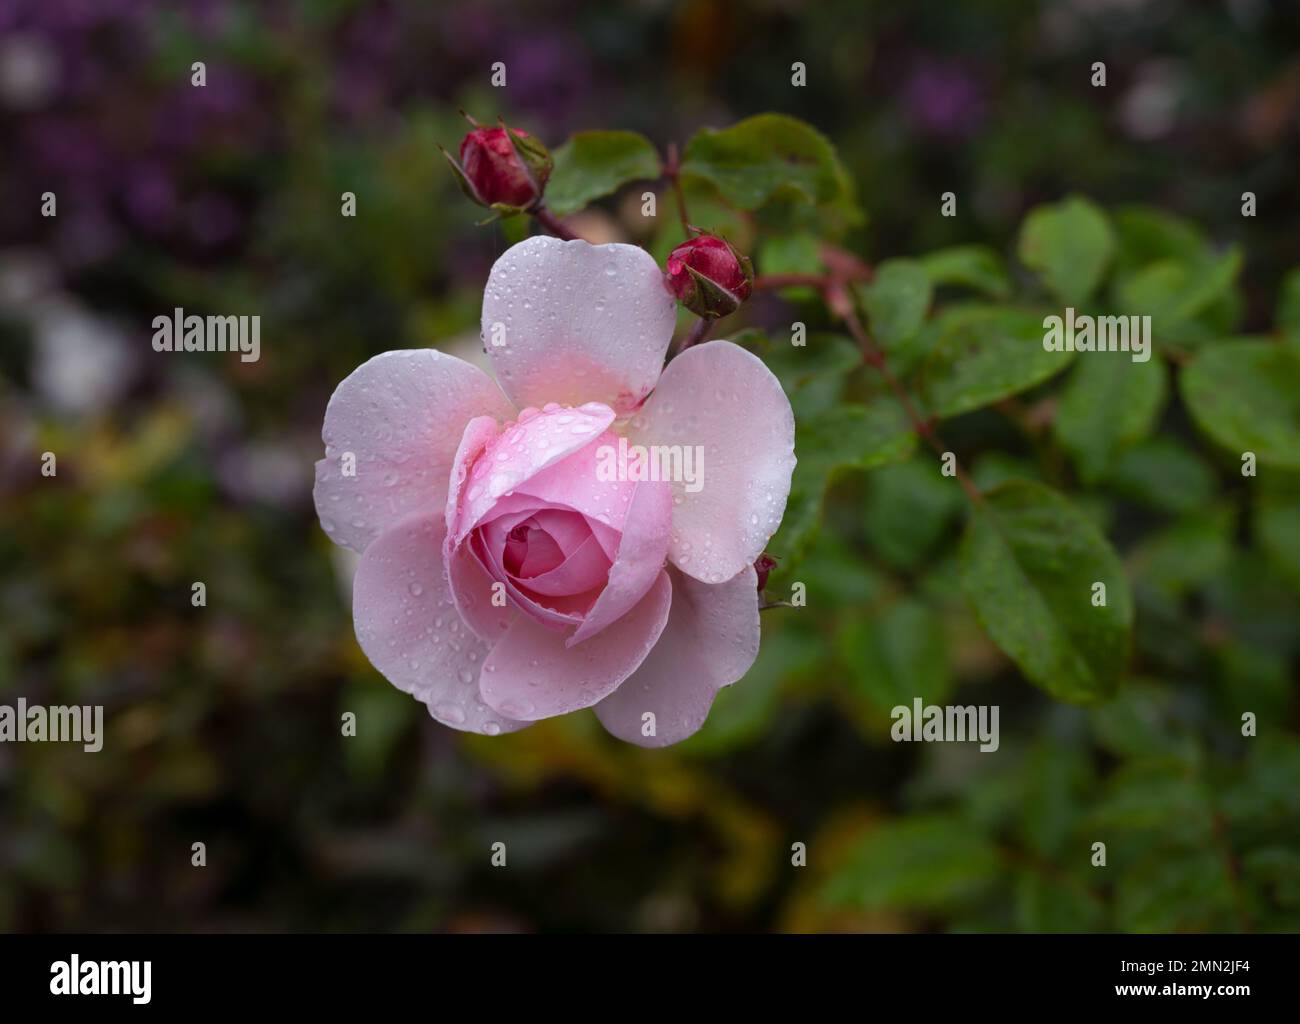 Close up of a beautiful vibrant pink rose with leaves and buds found at the rose garden Austria. Stock Photo